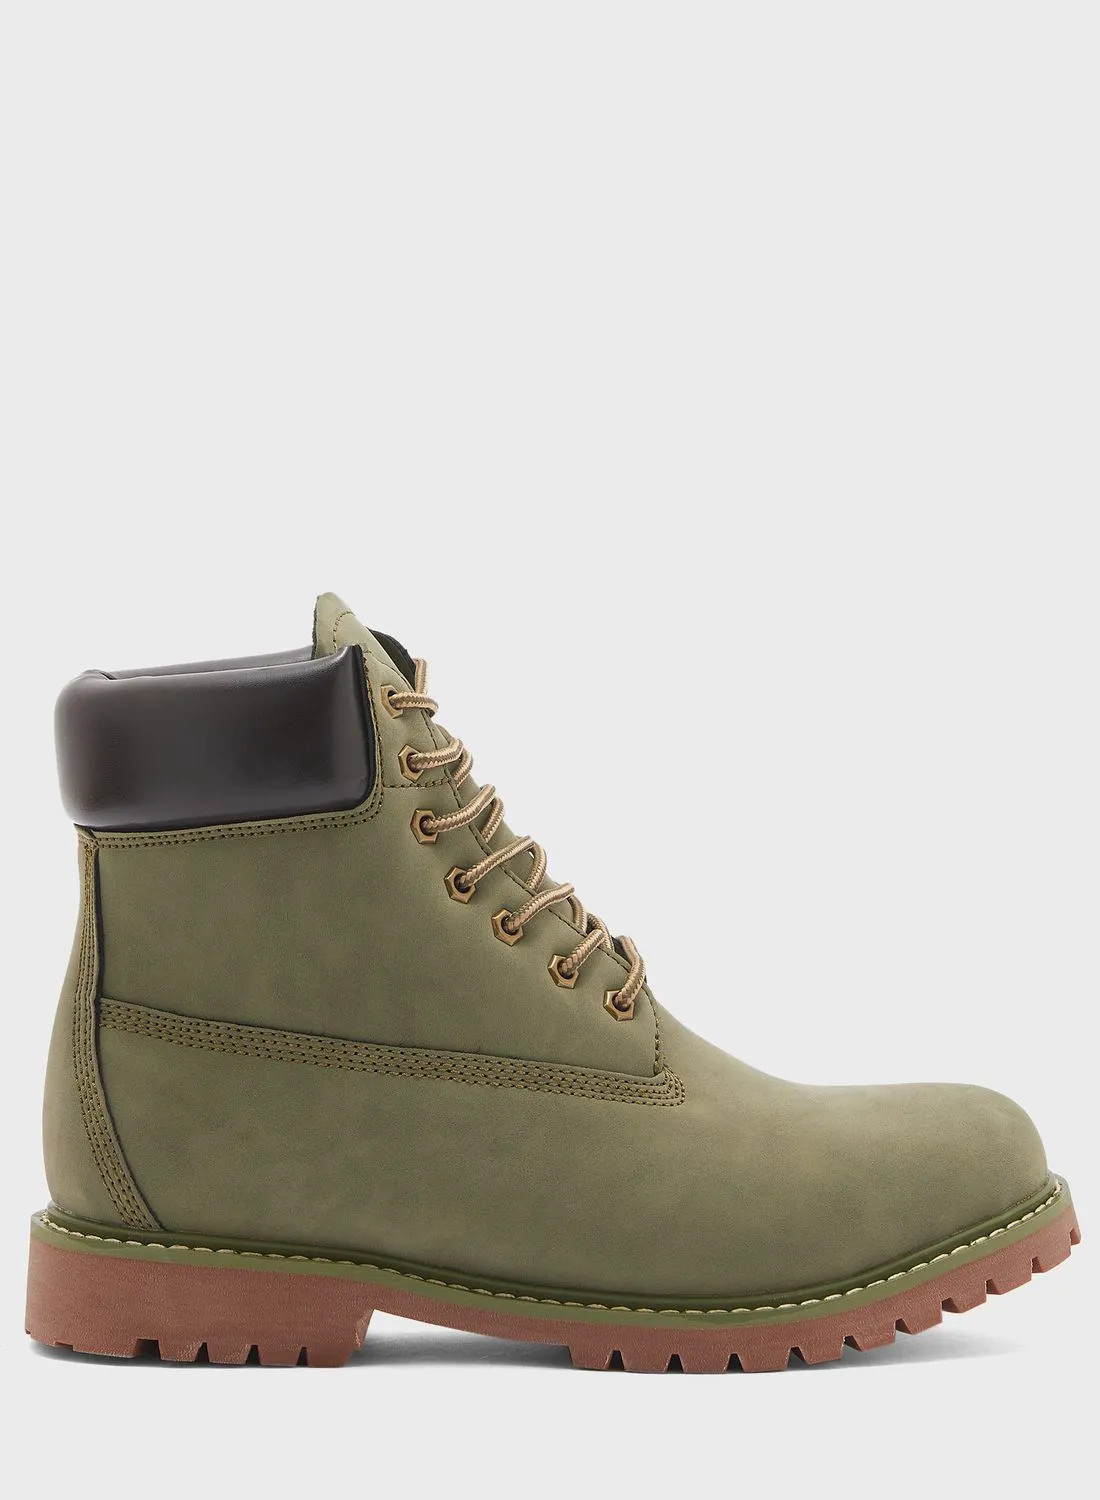 Robert Wood Casual Utility Boots